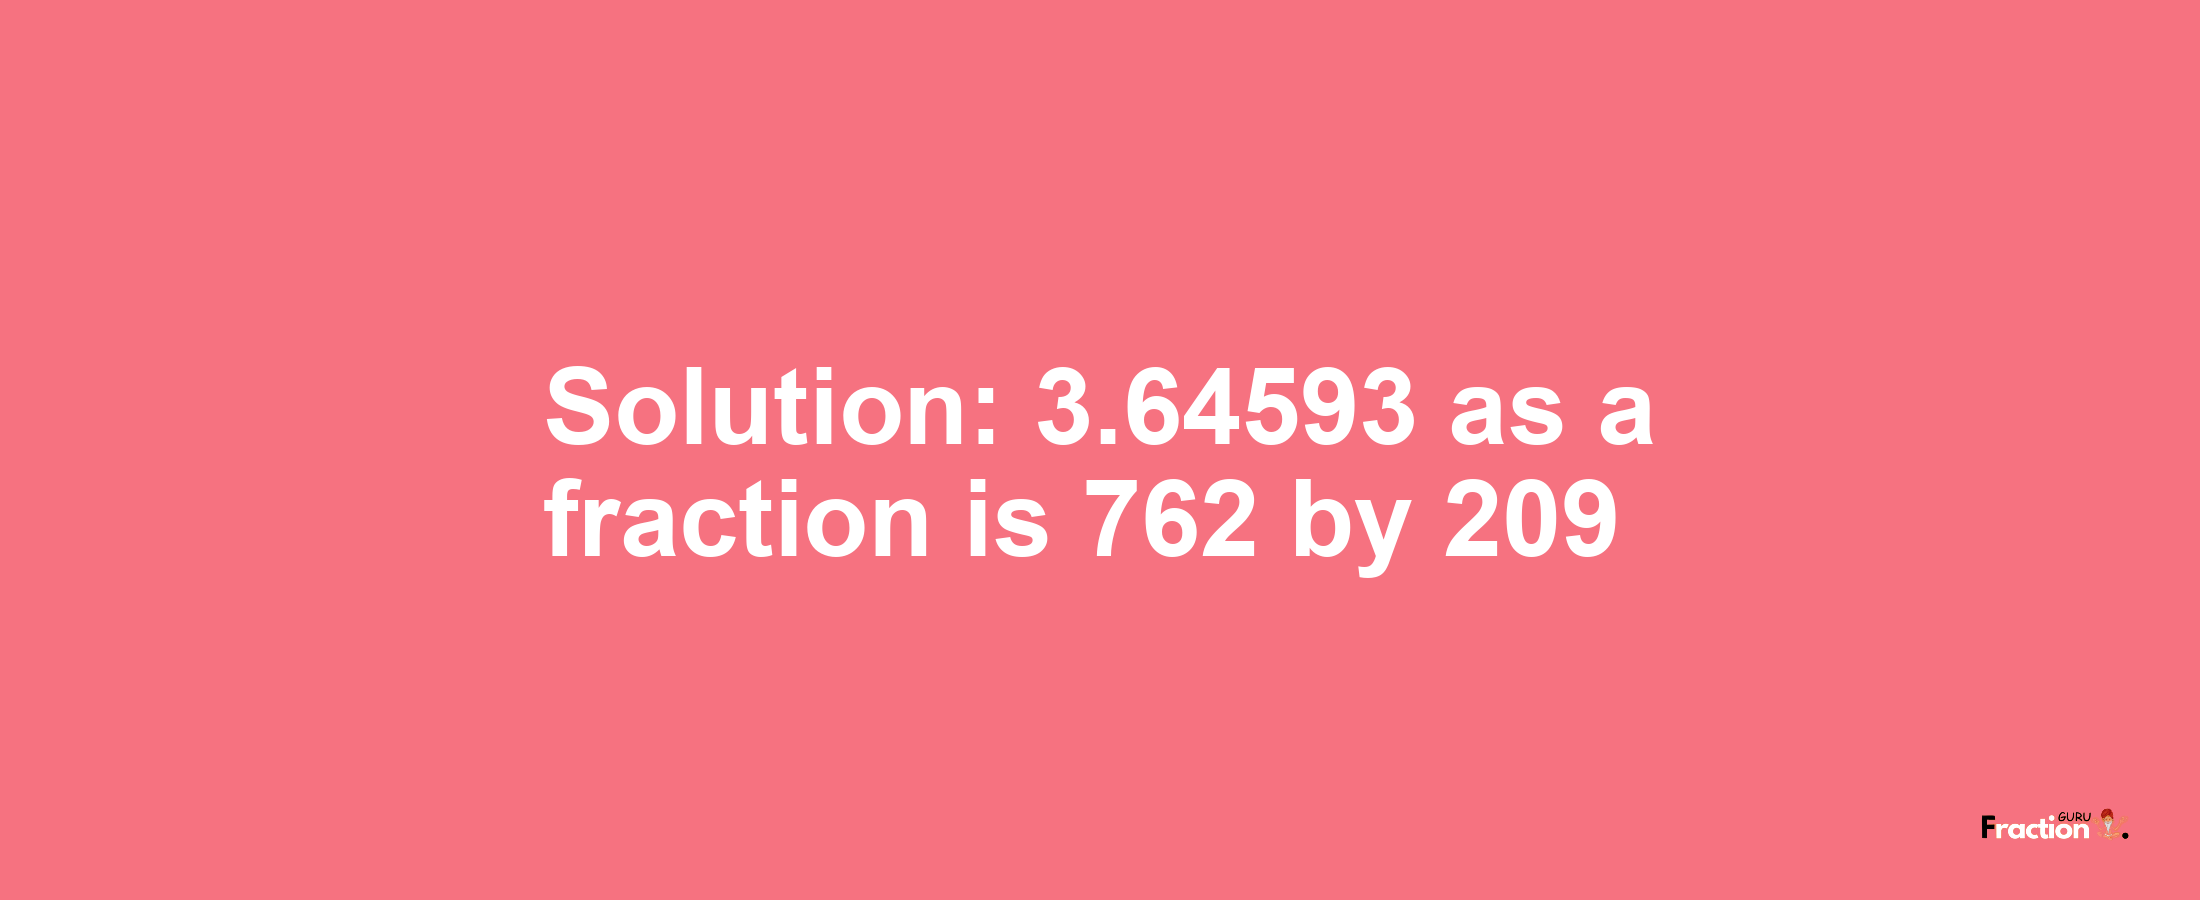 Solution:3.64593 as a fraction is 762/209